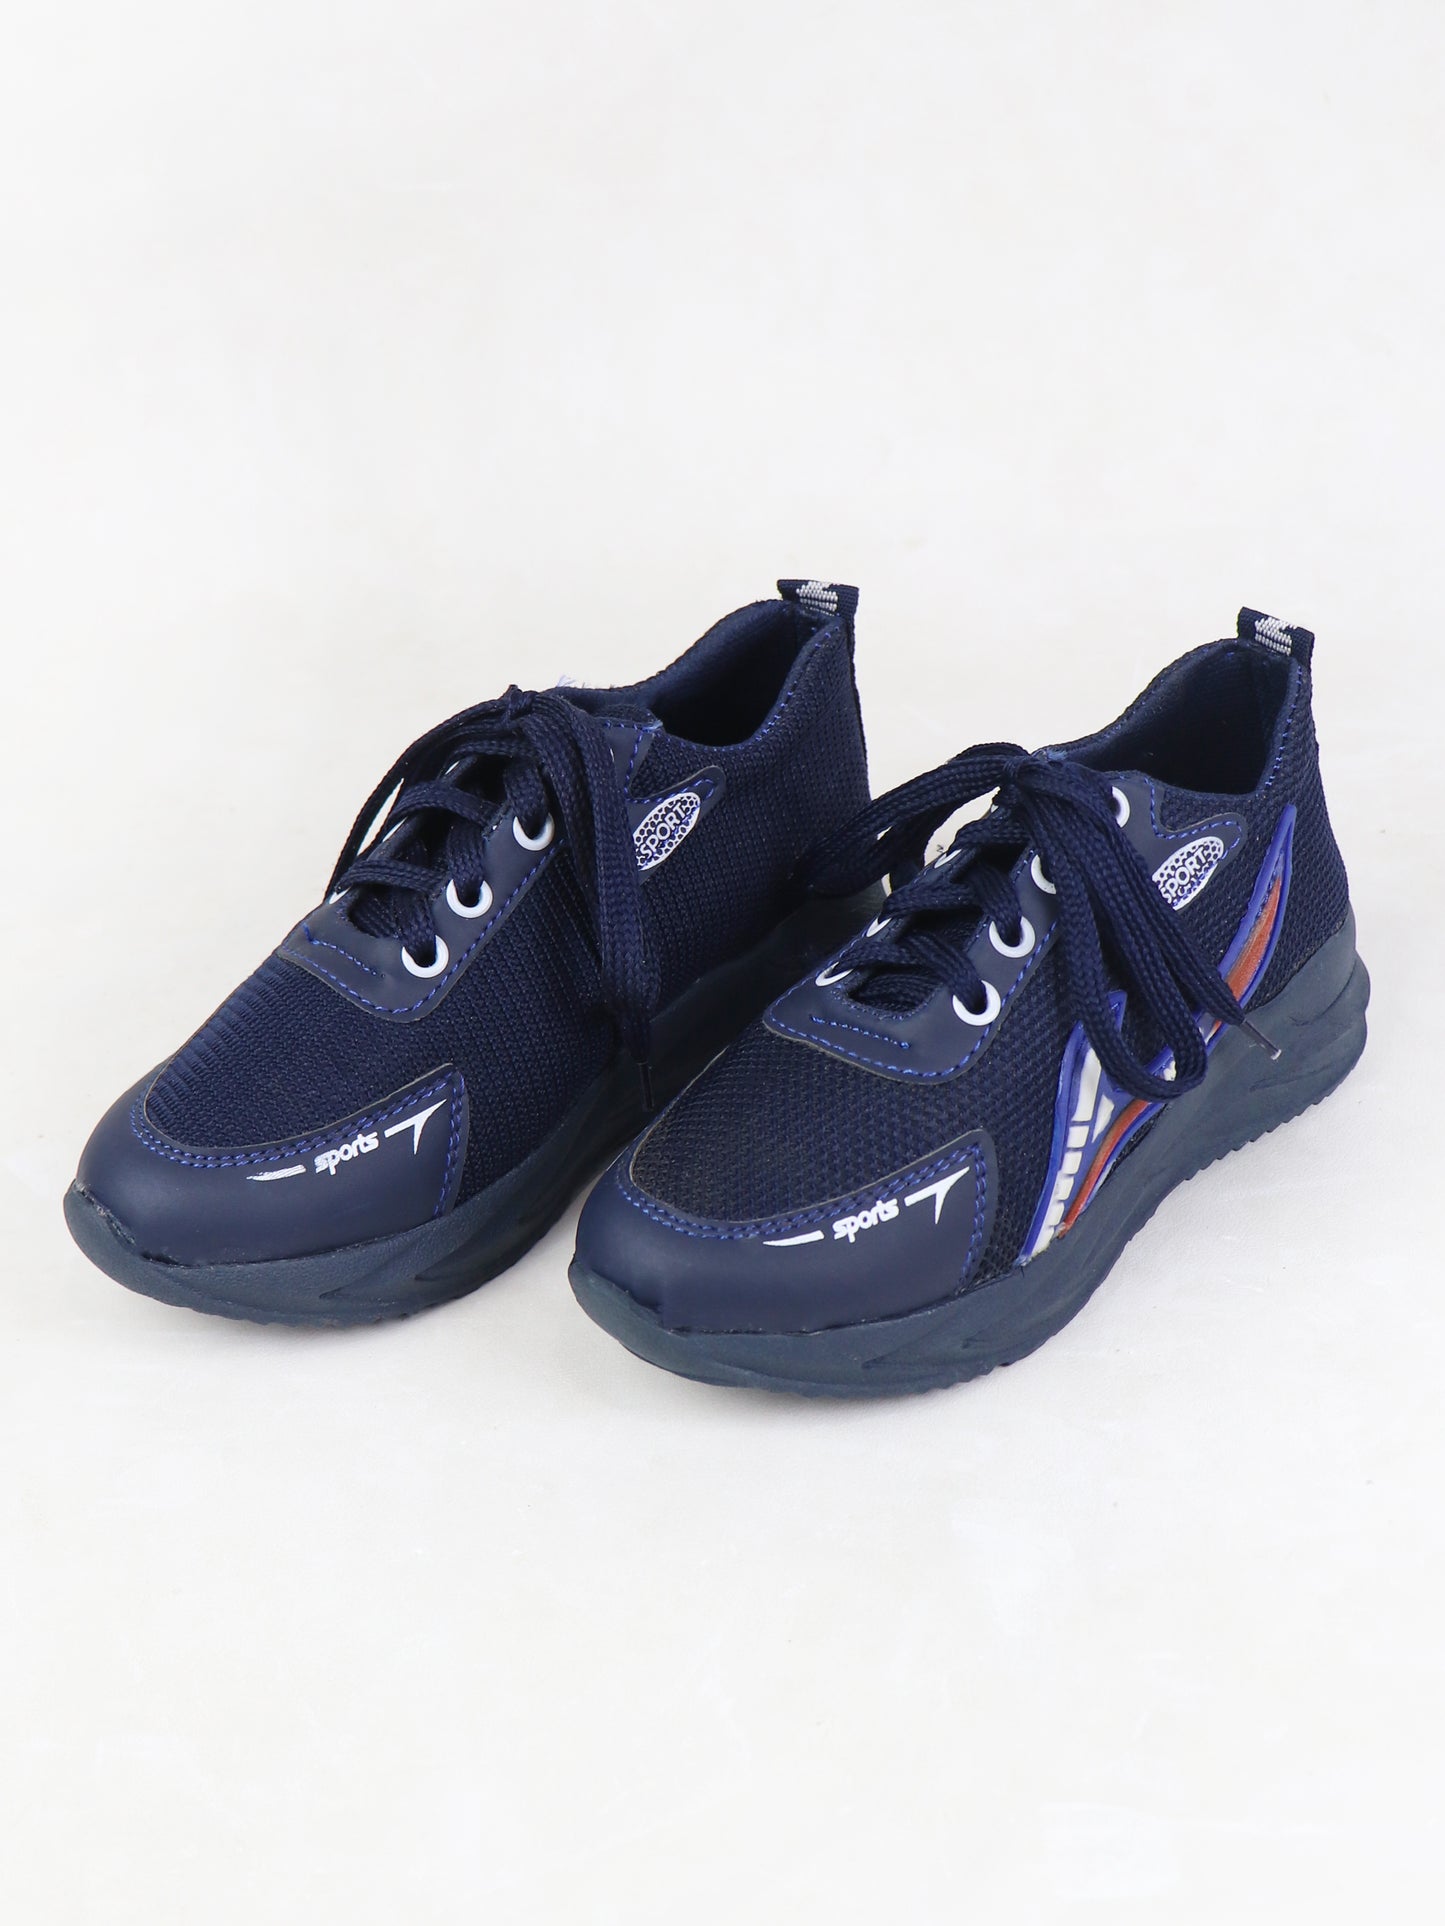 BS43 Boys Lace Shoes 8Yrs - 12Yrs Blue